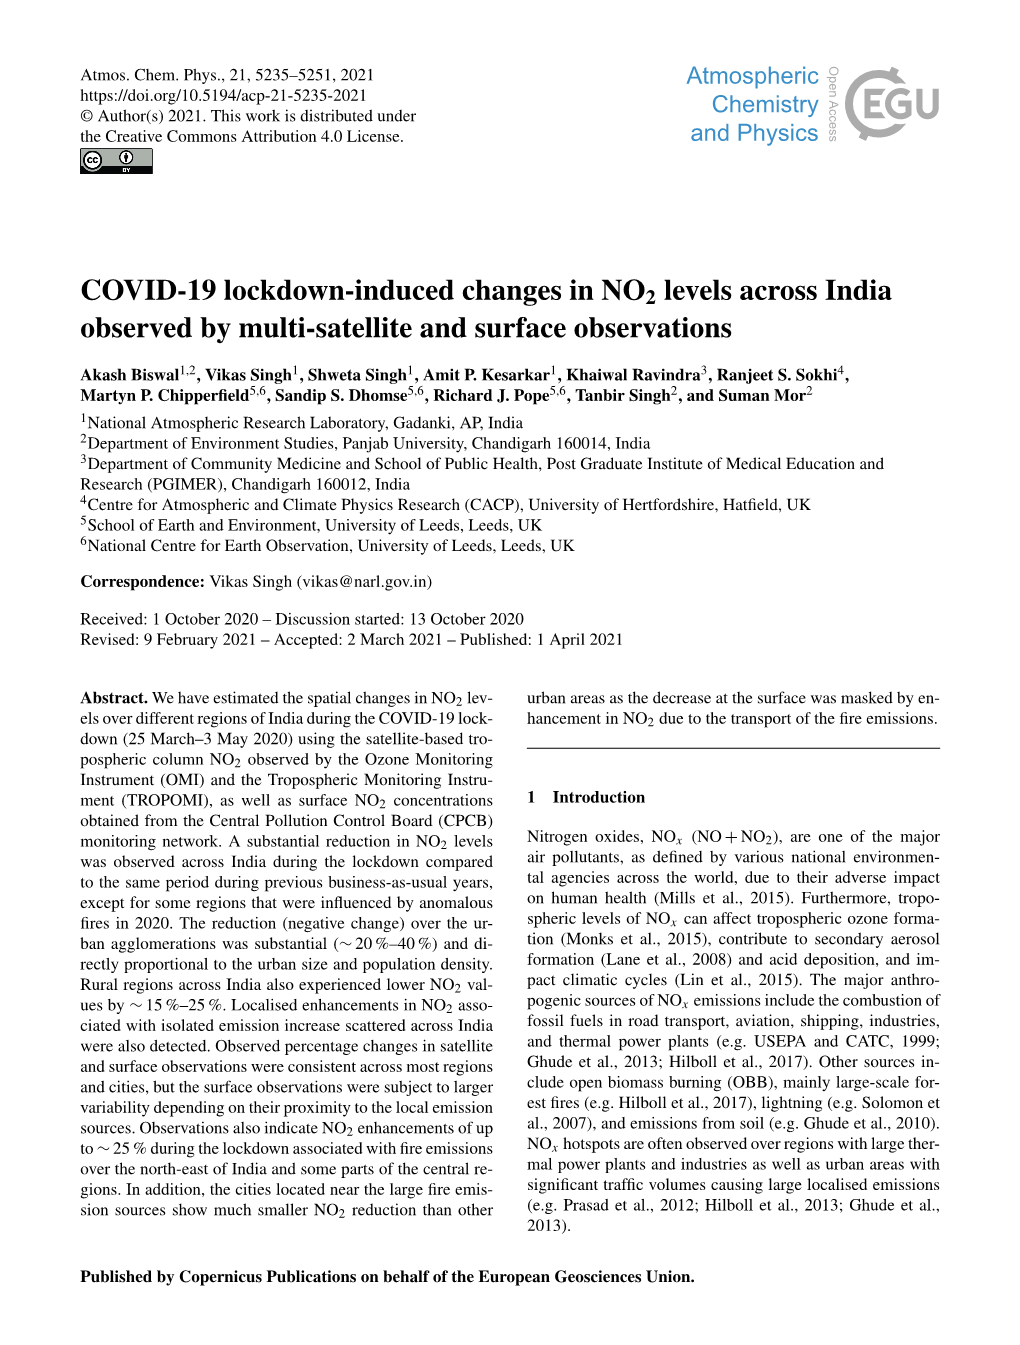 COVID-19 Lockdown-Induced Changes in NO2 Levels Across India Observed by Multi-Satellite and Surface Observations